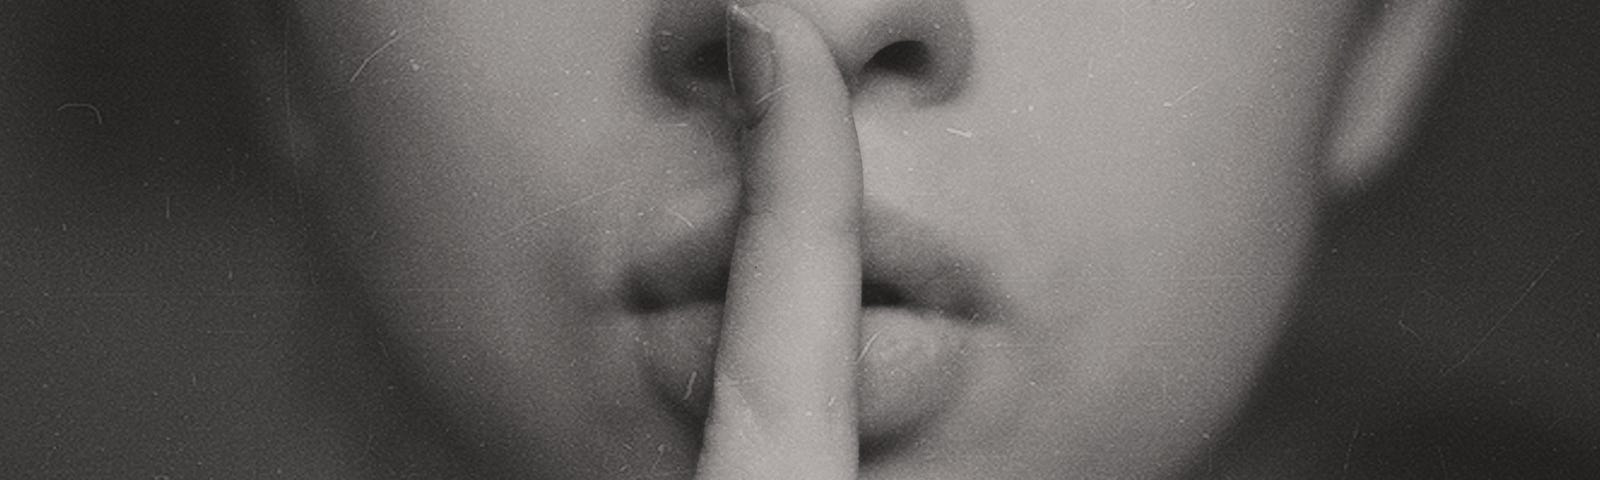 A woman being quiet by holding her finger to her mouth.